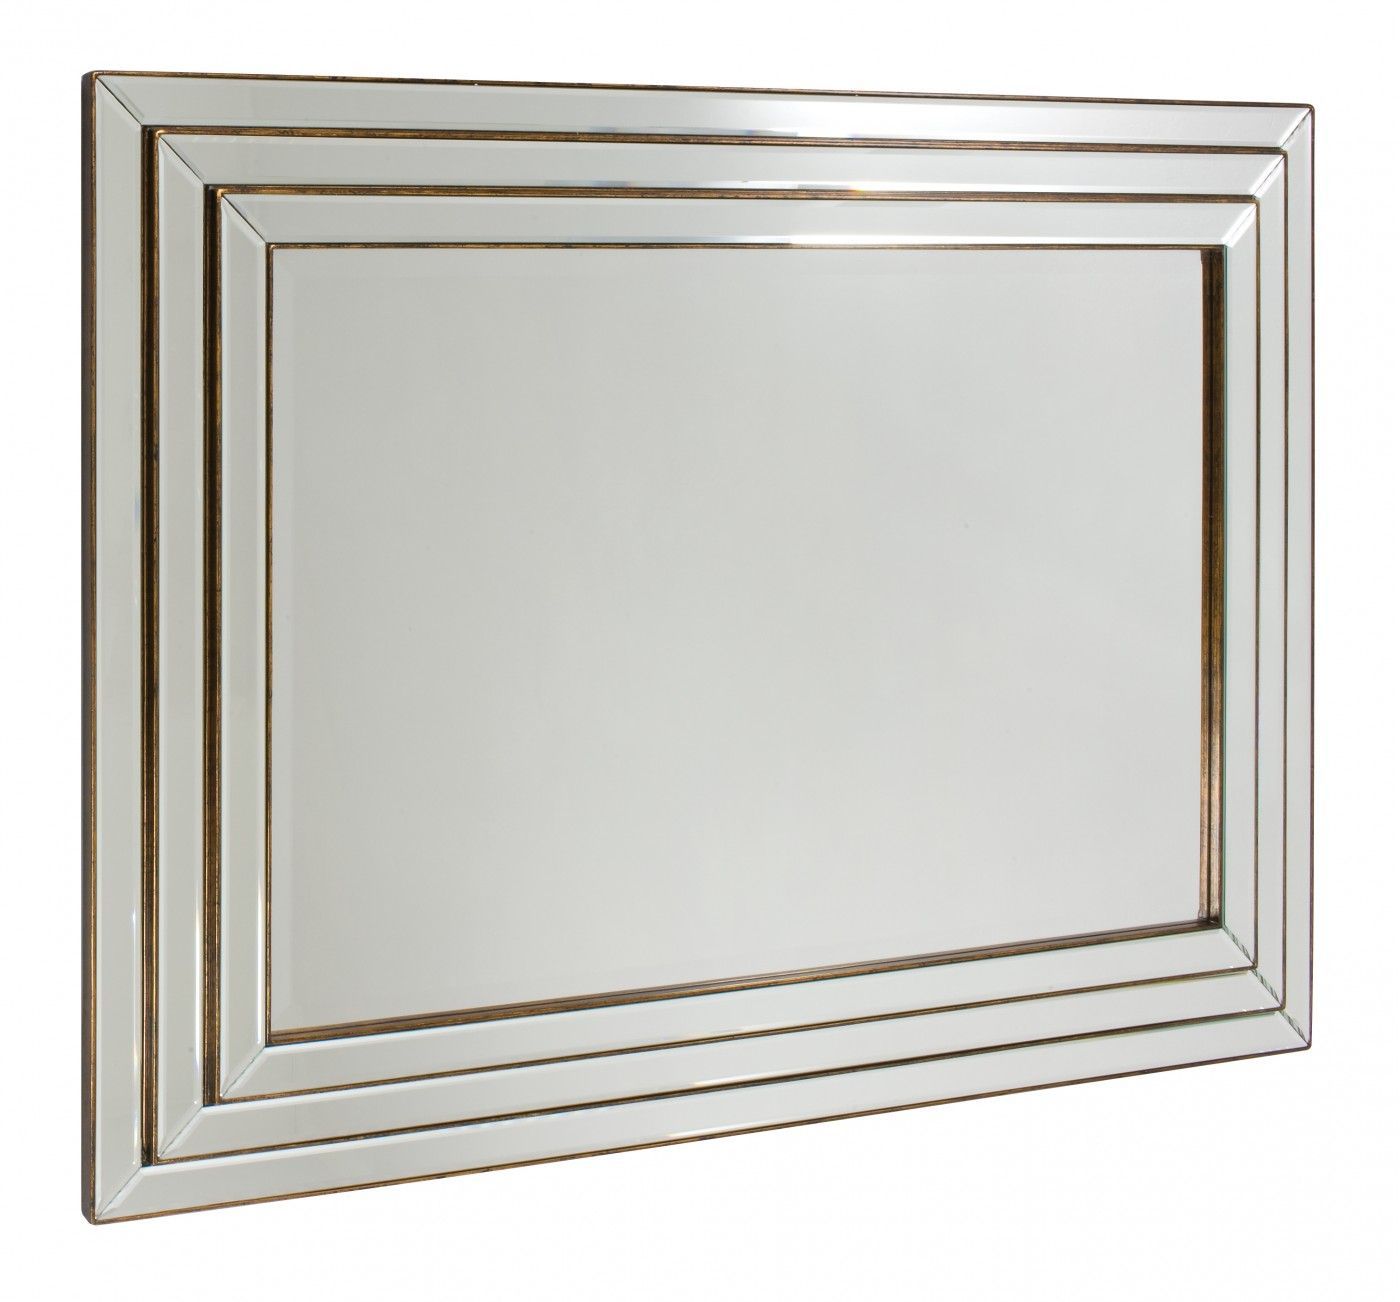 Chantel Wall Mirror Bronze In 2019 | Rustic Wall Mirrors, Mirror With Regard To Silver And Bronze Wall Mirrors (Photo 15 of 15)